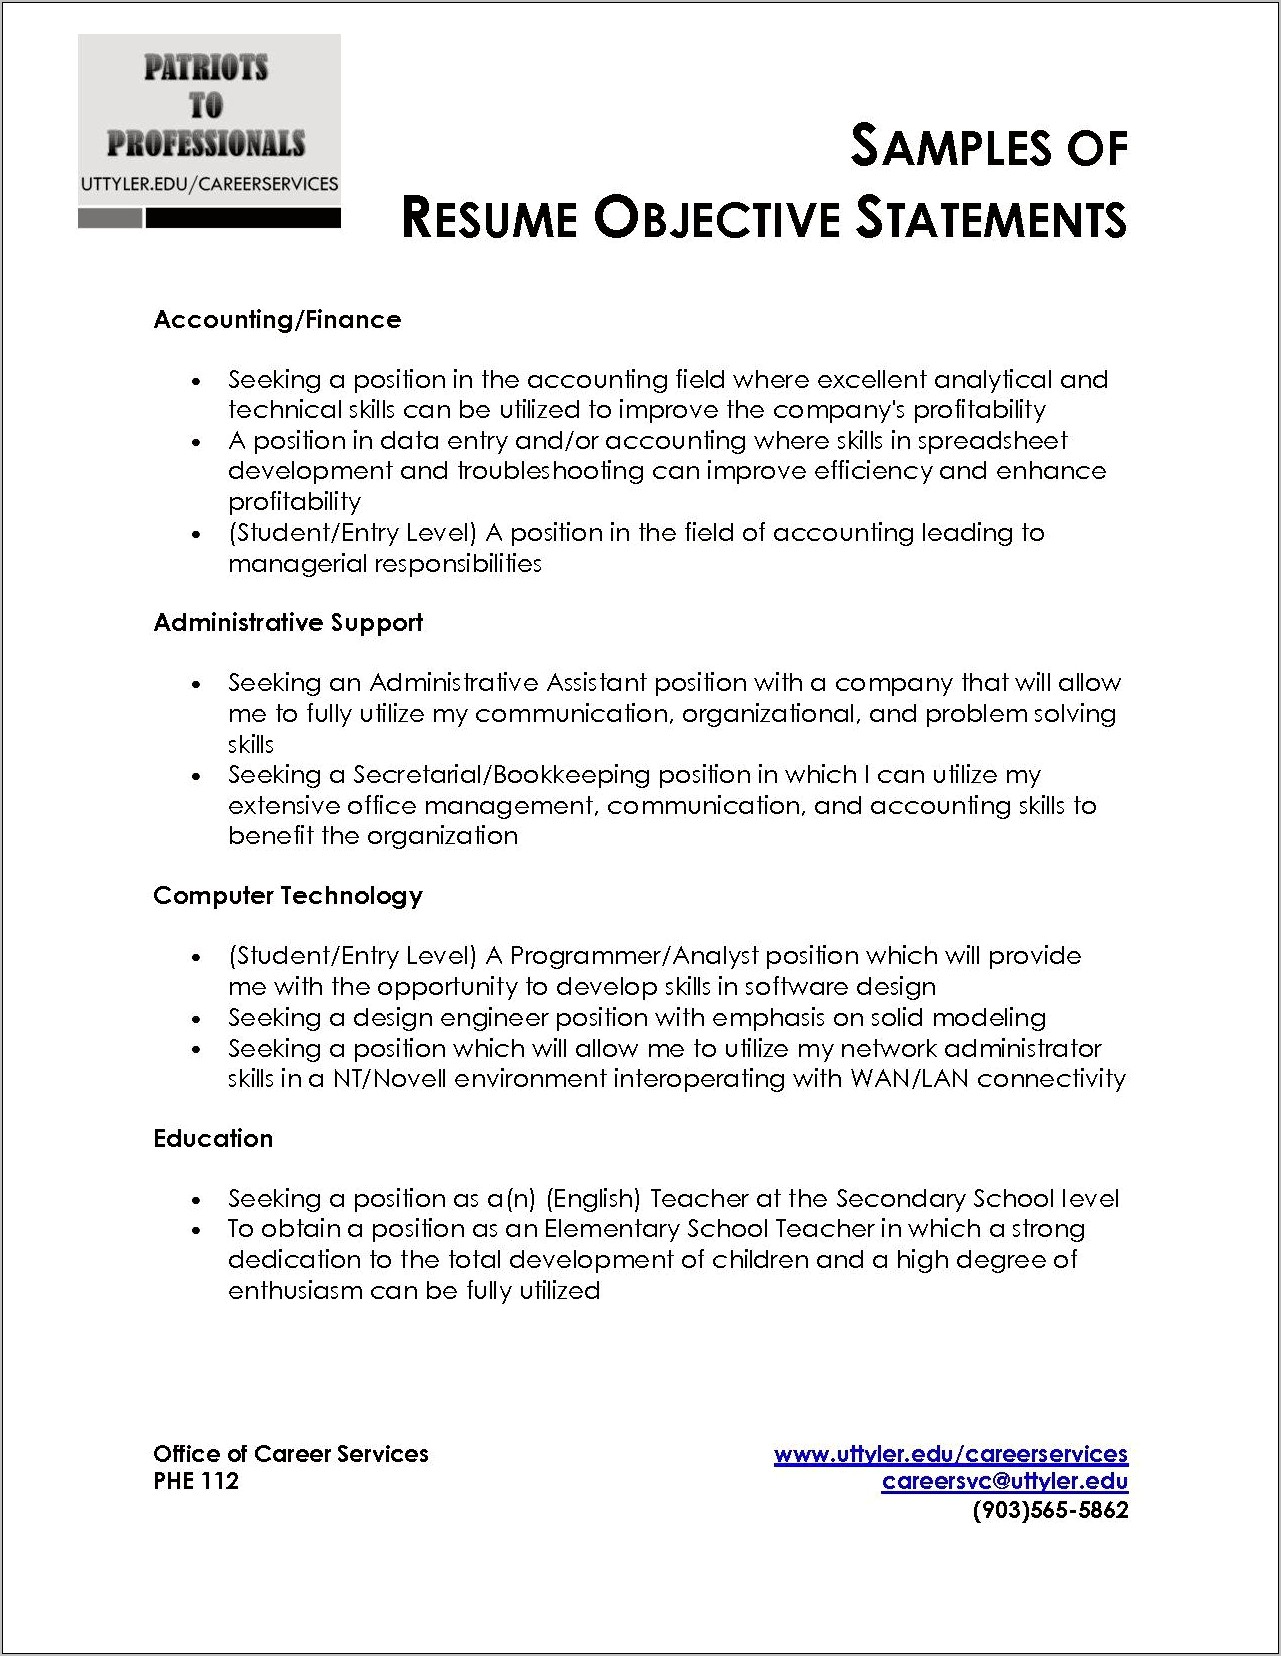 Best Examples Of Resume Objective Statements